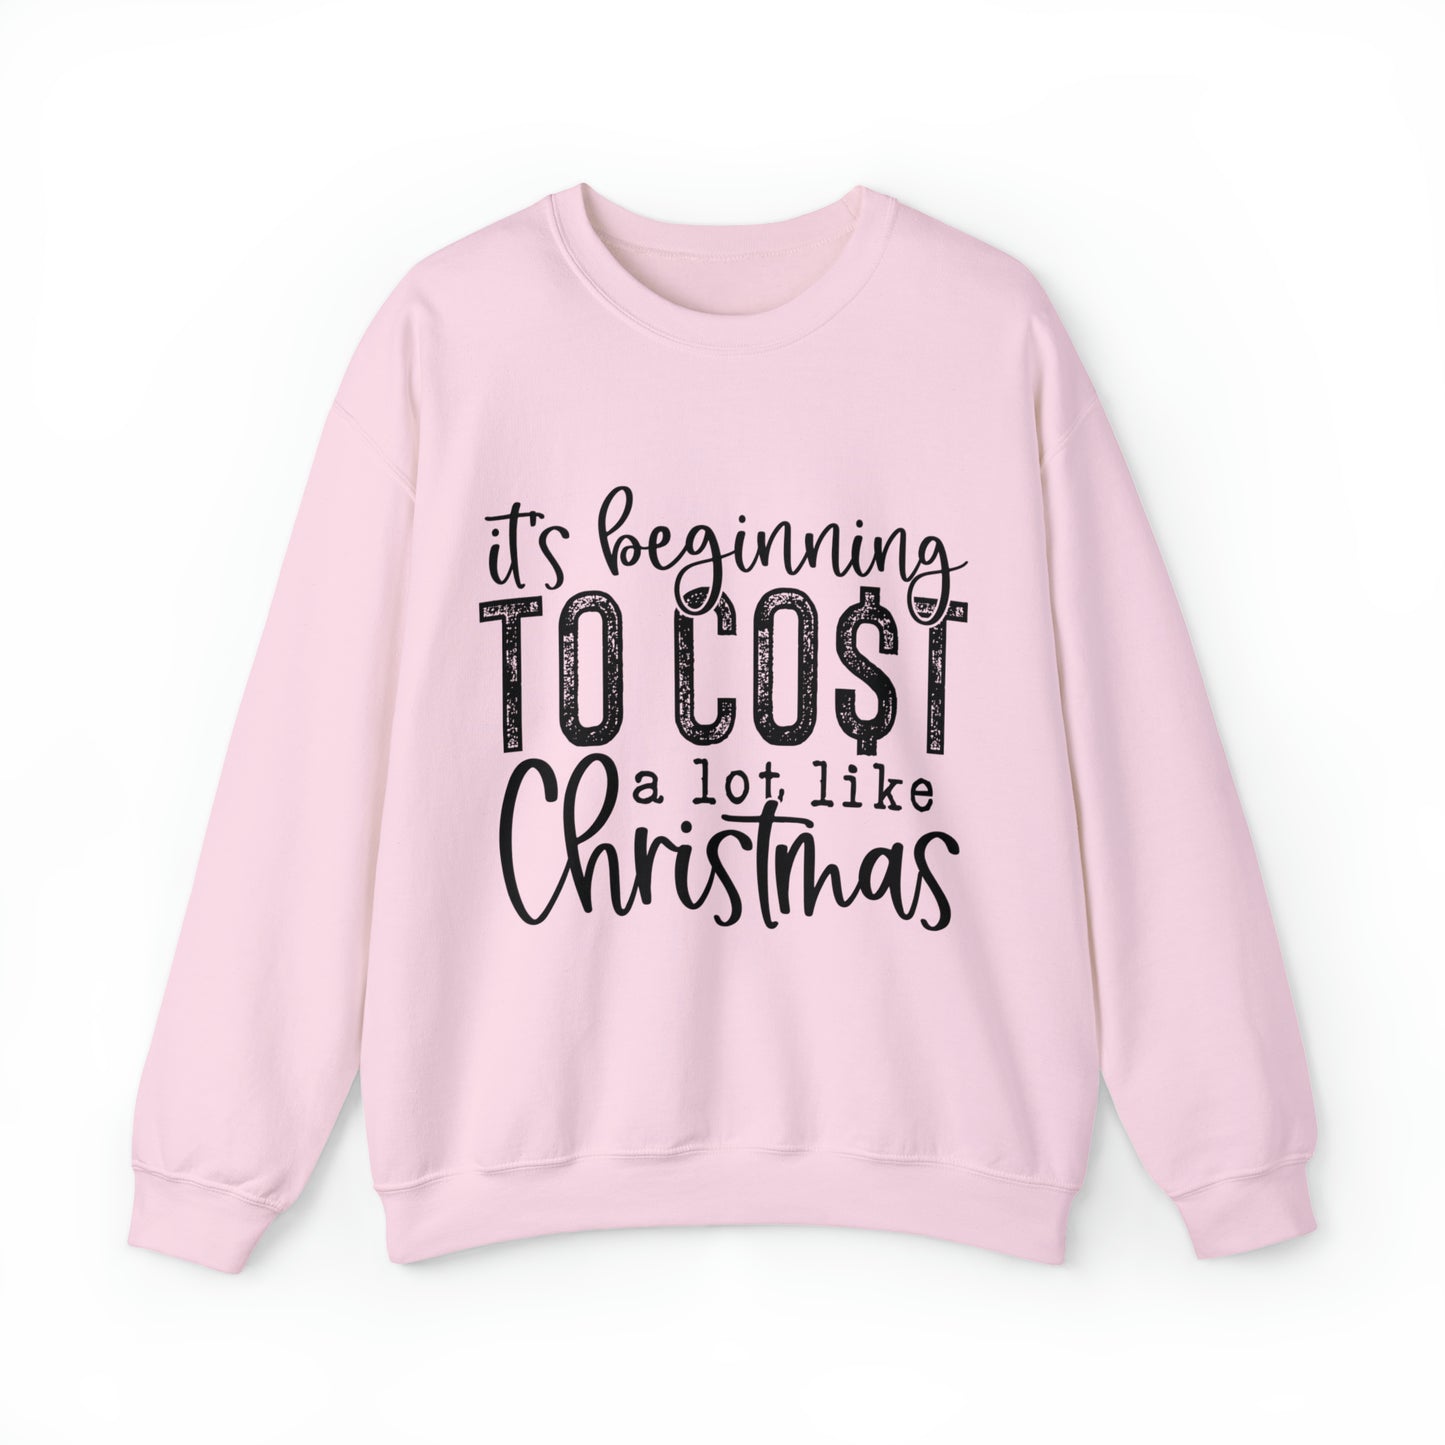 It's Beginning to Cost a Lot Like Christmas Unisex Adult Funny Christmas Shirt with Black